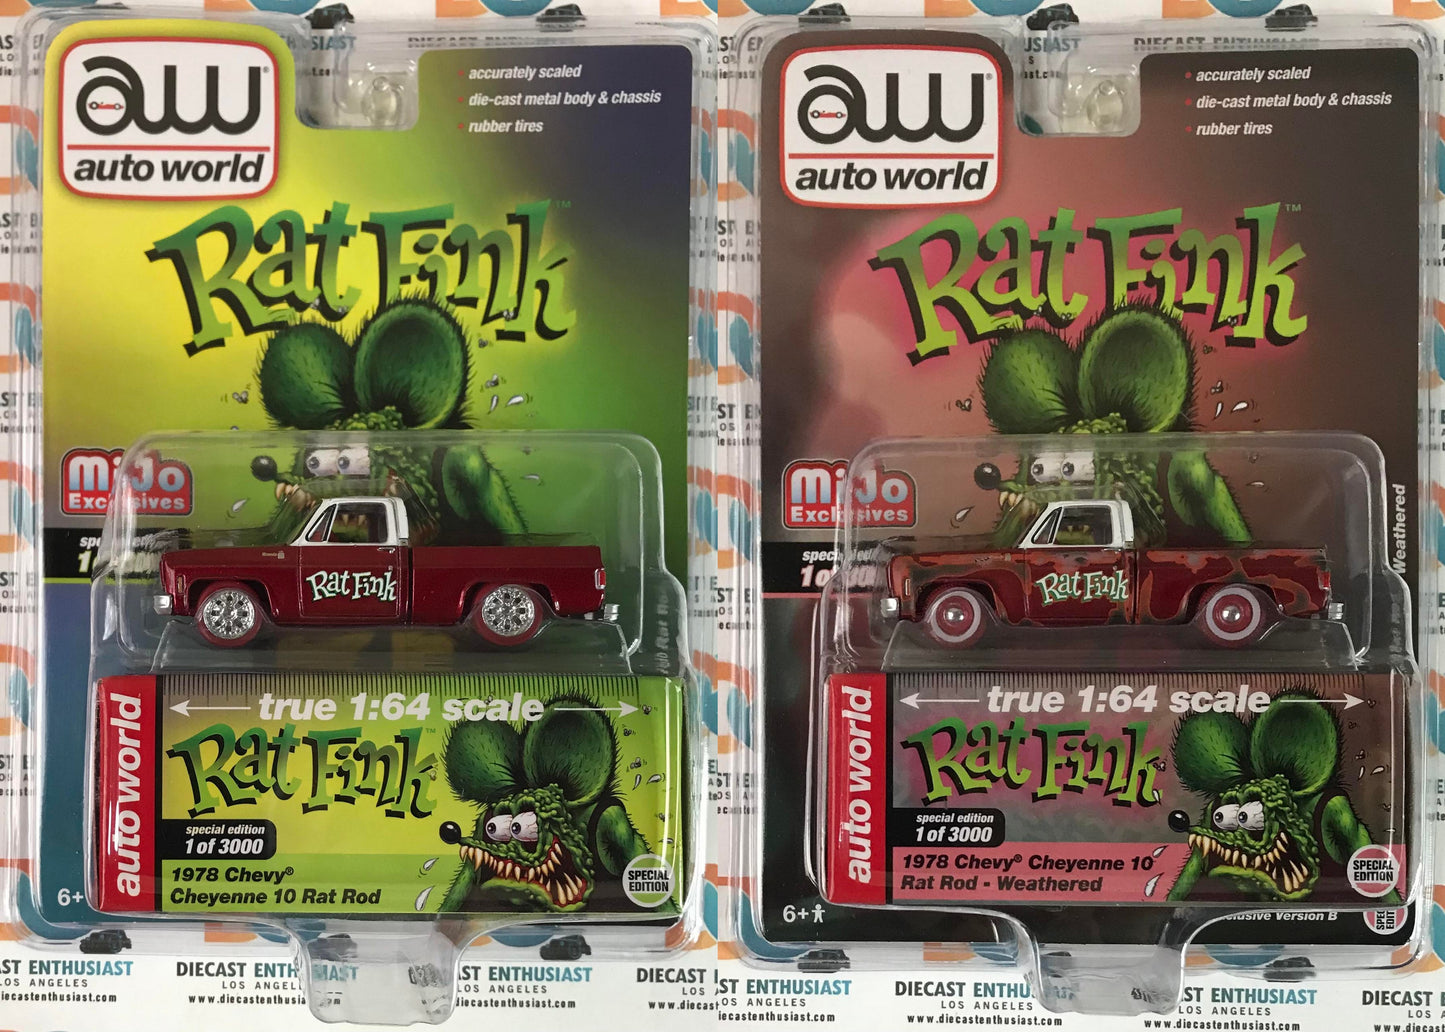 CHASE Auto World Mijo Exclusives Rat Fink 1978 Chevy Cheyenne 10 Rat Rod & Weathered 1:64